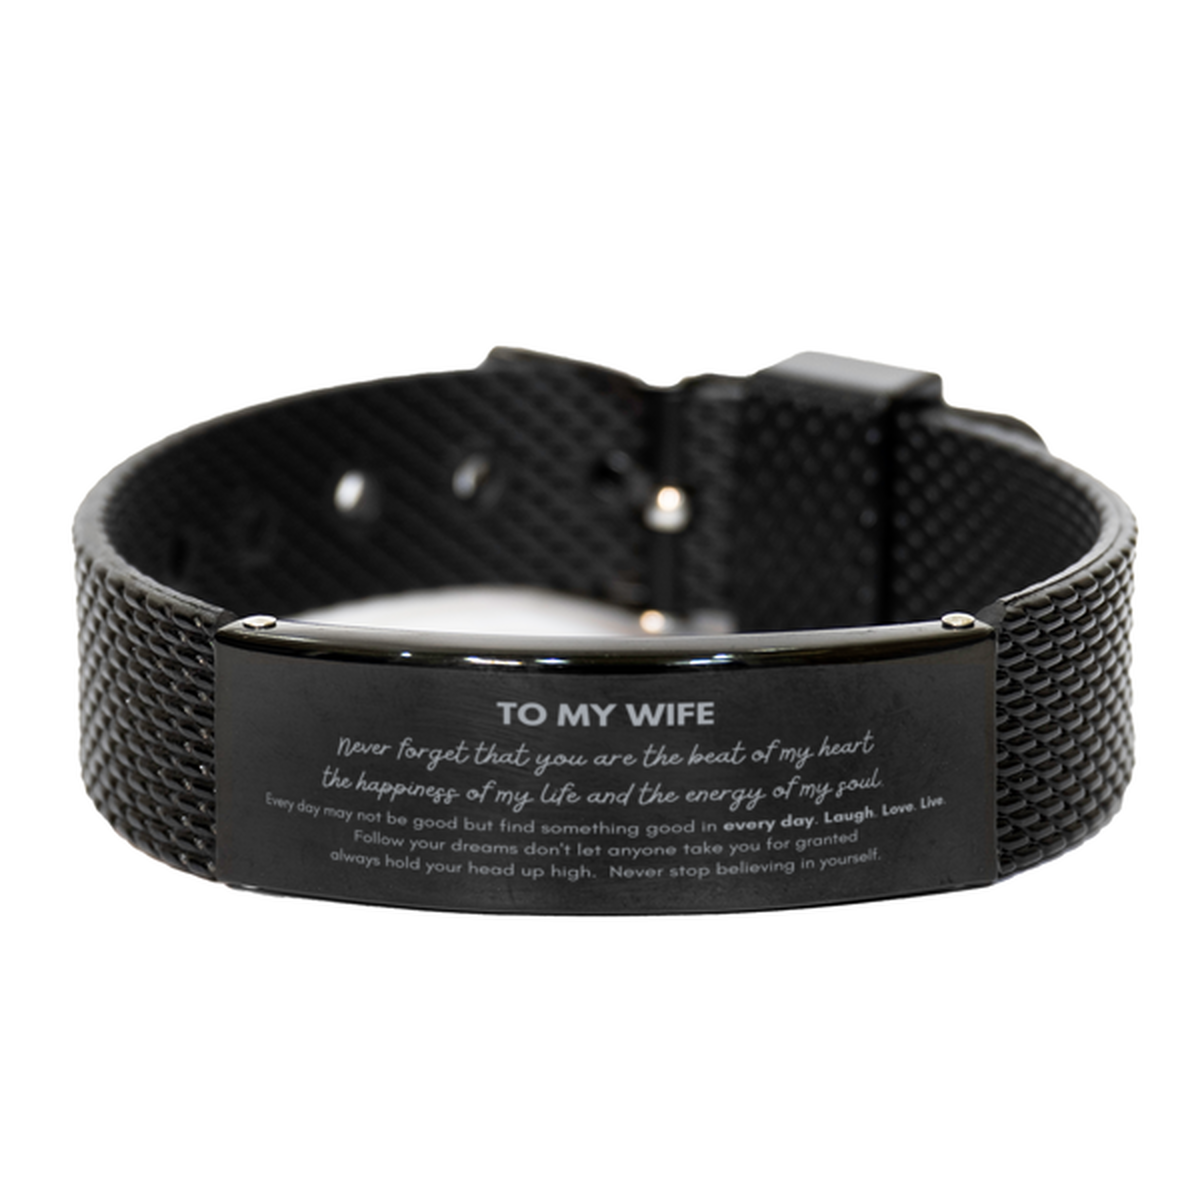 To My Wife Bracelet Gifts, Christmas Wife Black Shark Mesh Bracelet Present, Birthday Unique Motivational For Wife, To My Wife Never forget that you are the beat of my heart the happiness of my life and the energy of my soul